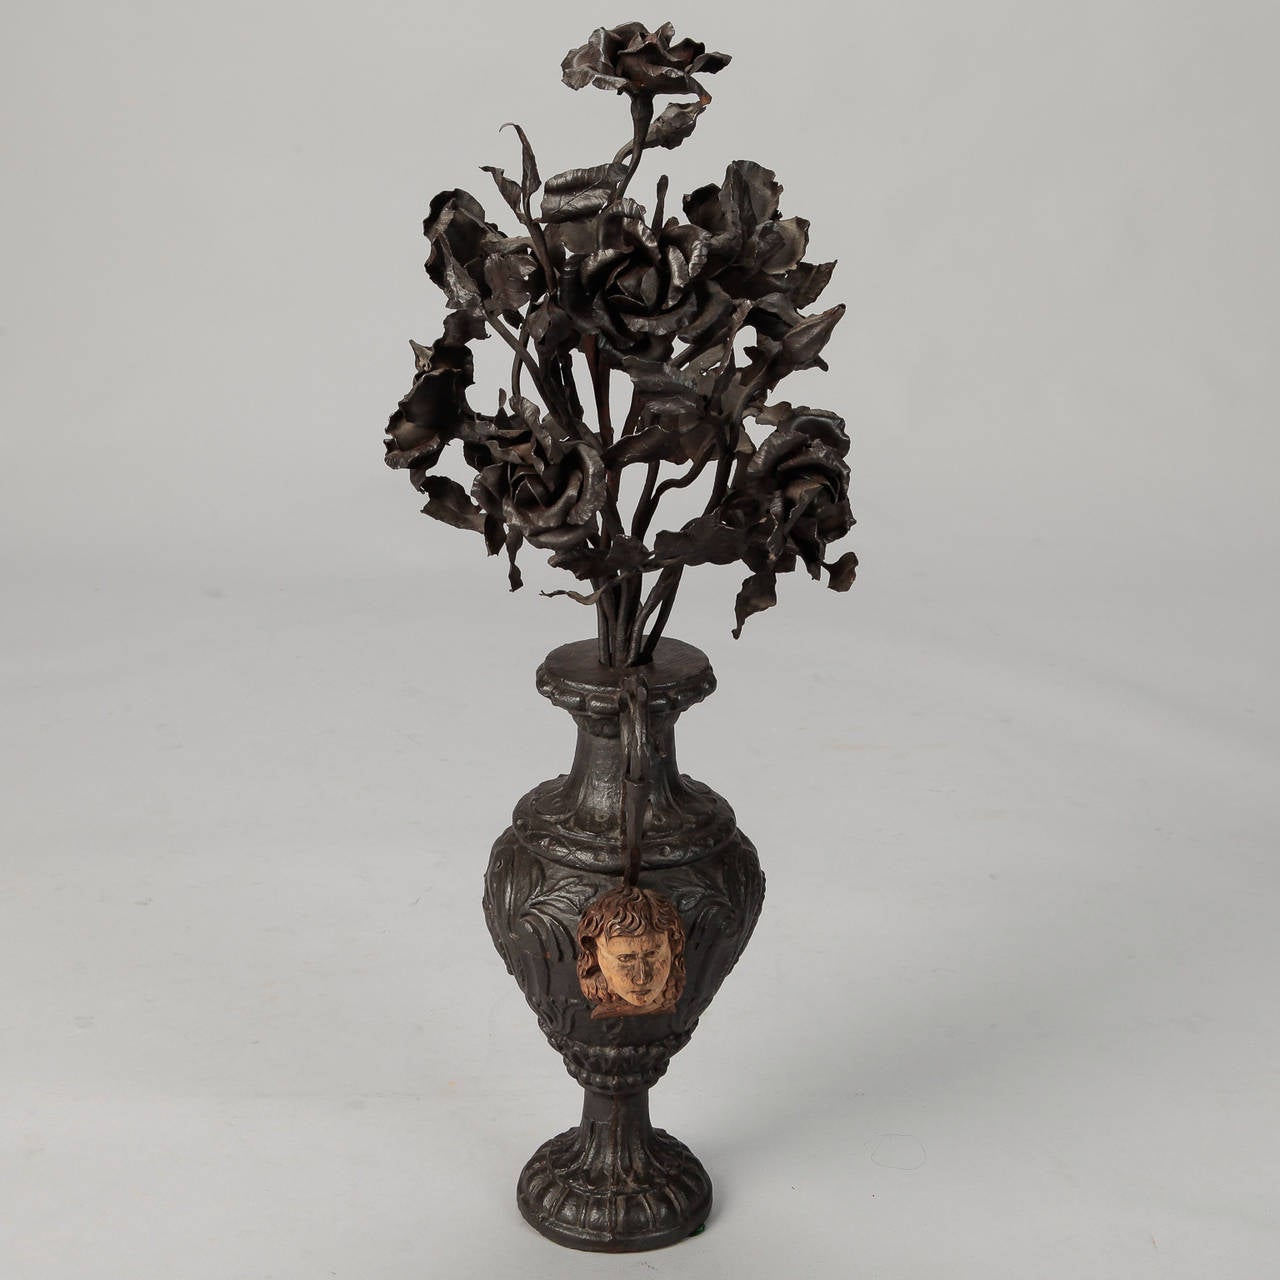 Black cast iron urn is over two feet tall and is topped with intricately rendered roses and decorated with putti faces at the sides, circa 1880s.